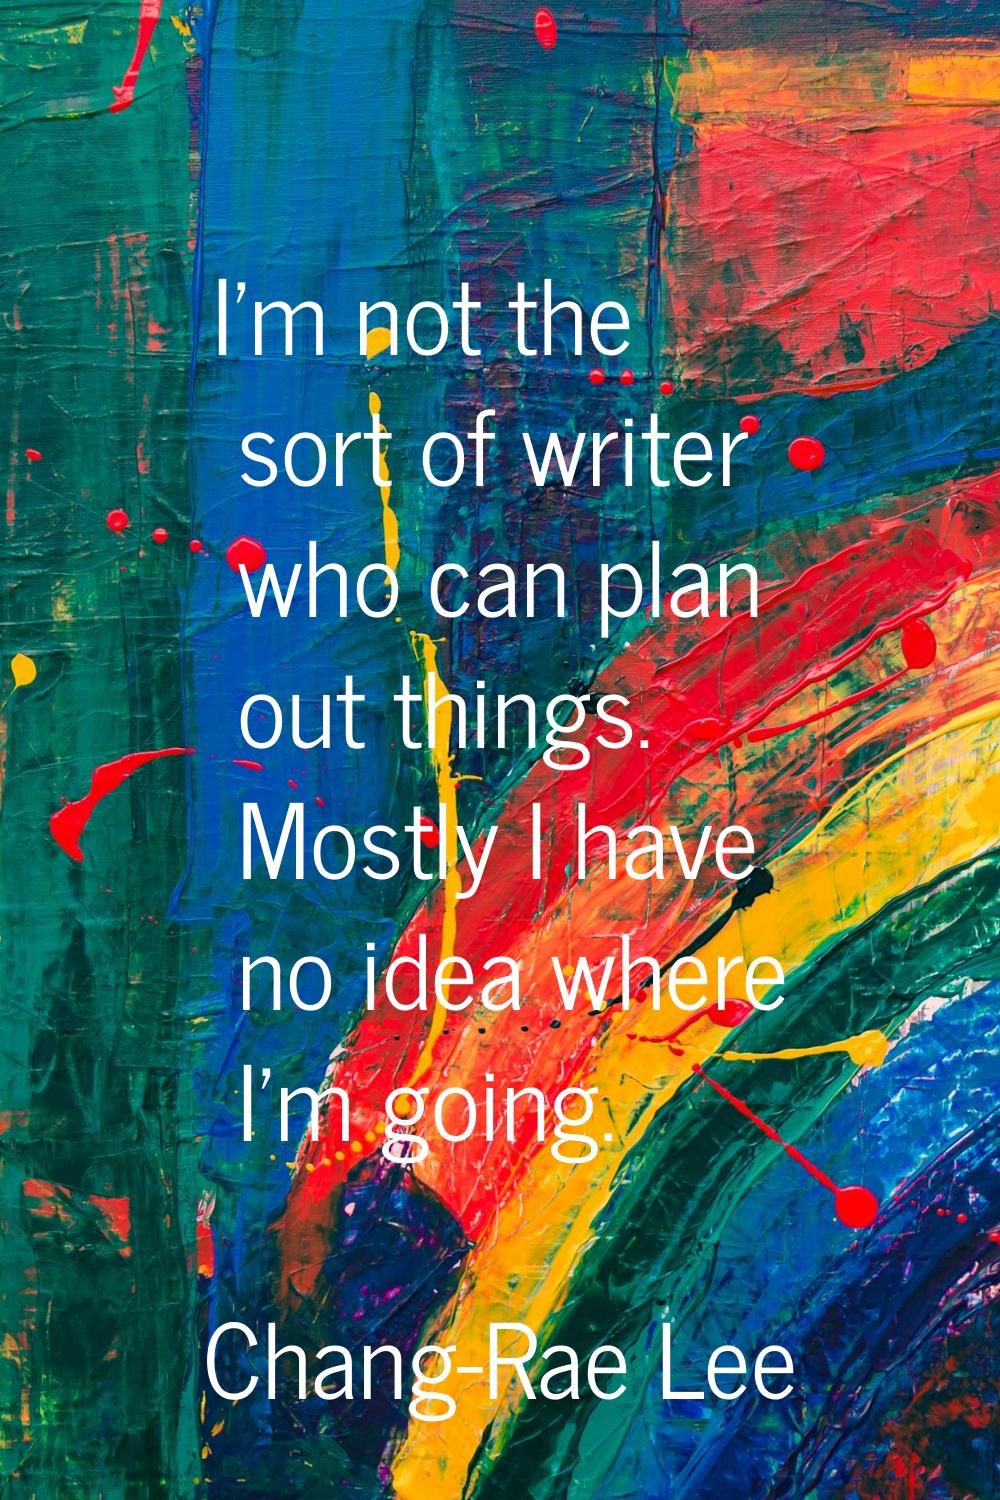 I'm not the sort of writer who can plan out things. Mostly I have no idea where I'm going.